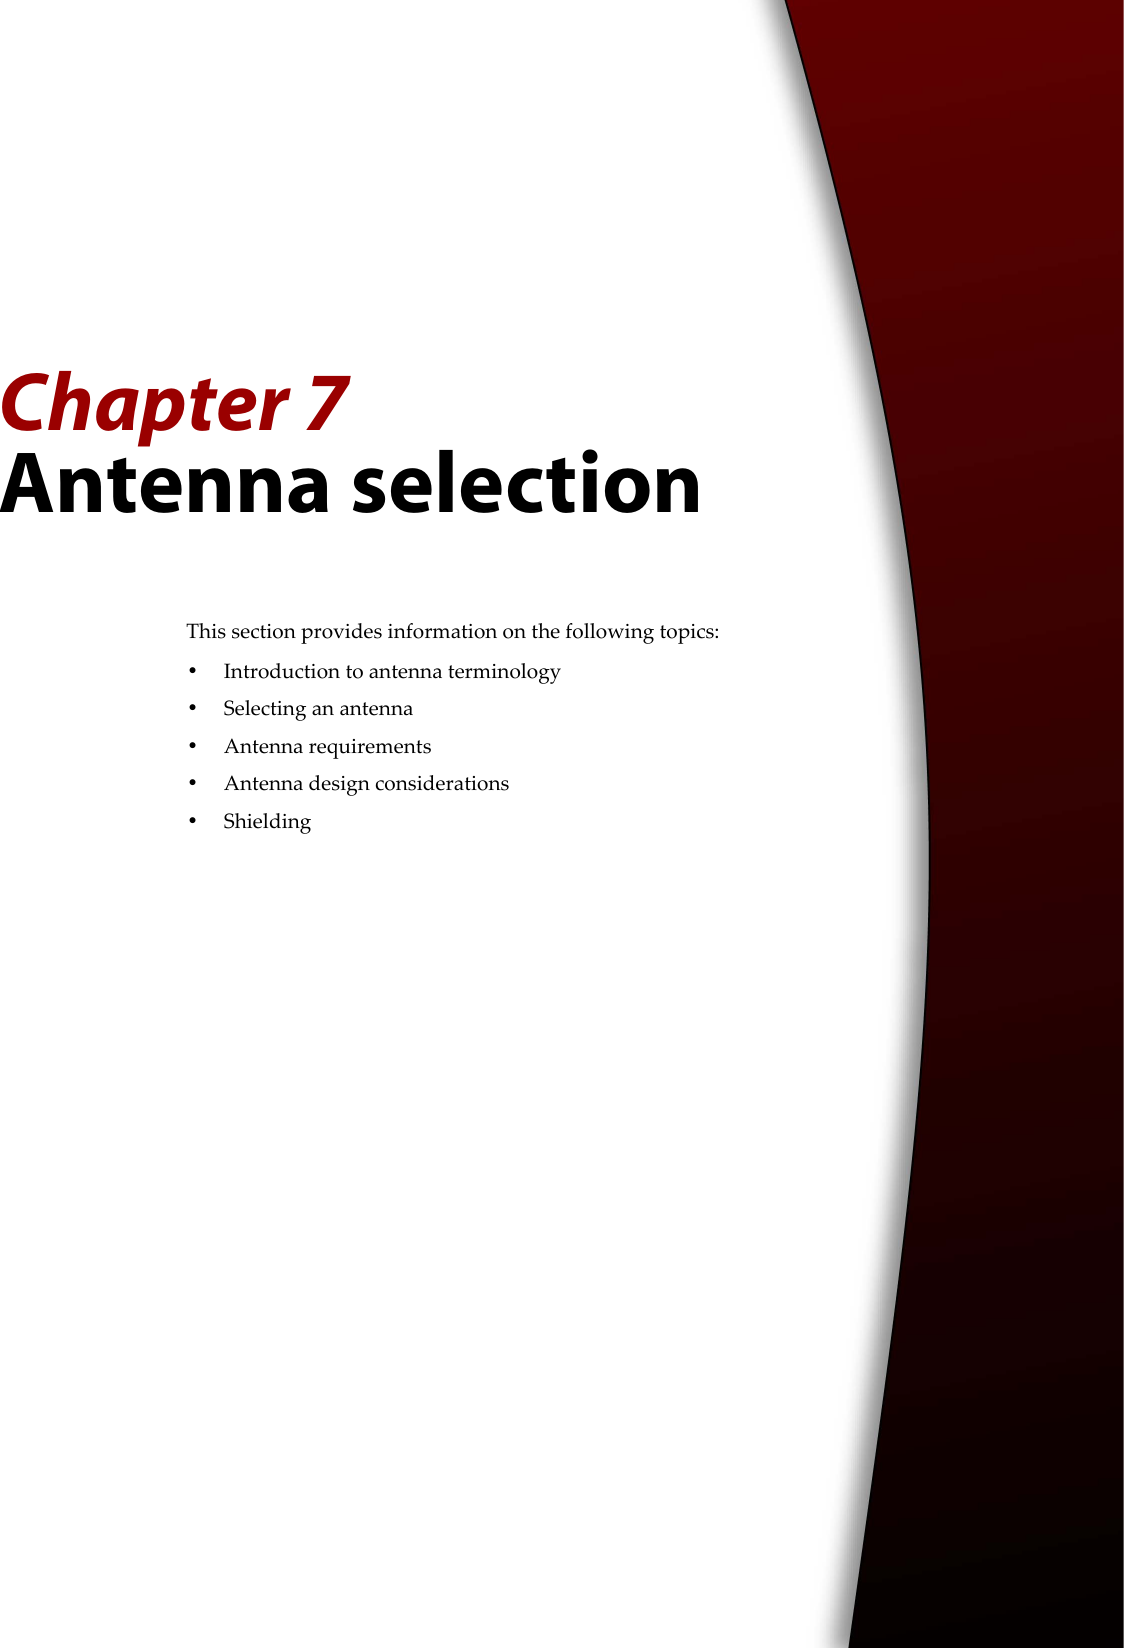 Chapter 7Antenna selectionThis section provides information on the following topics:•Introduction to antenna terminology•Selecting an antenna•Antenna requirements•Antenna design considerations•Shielding